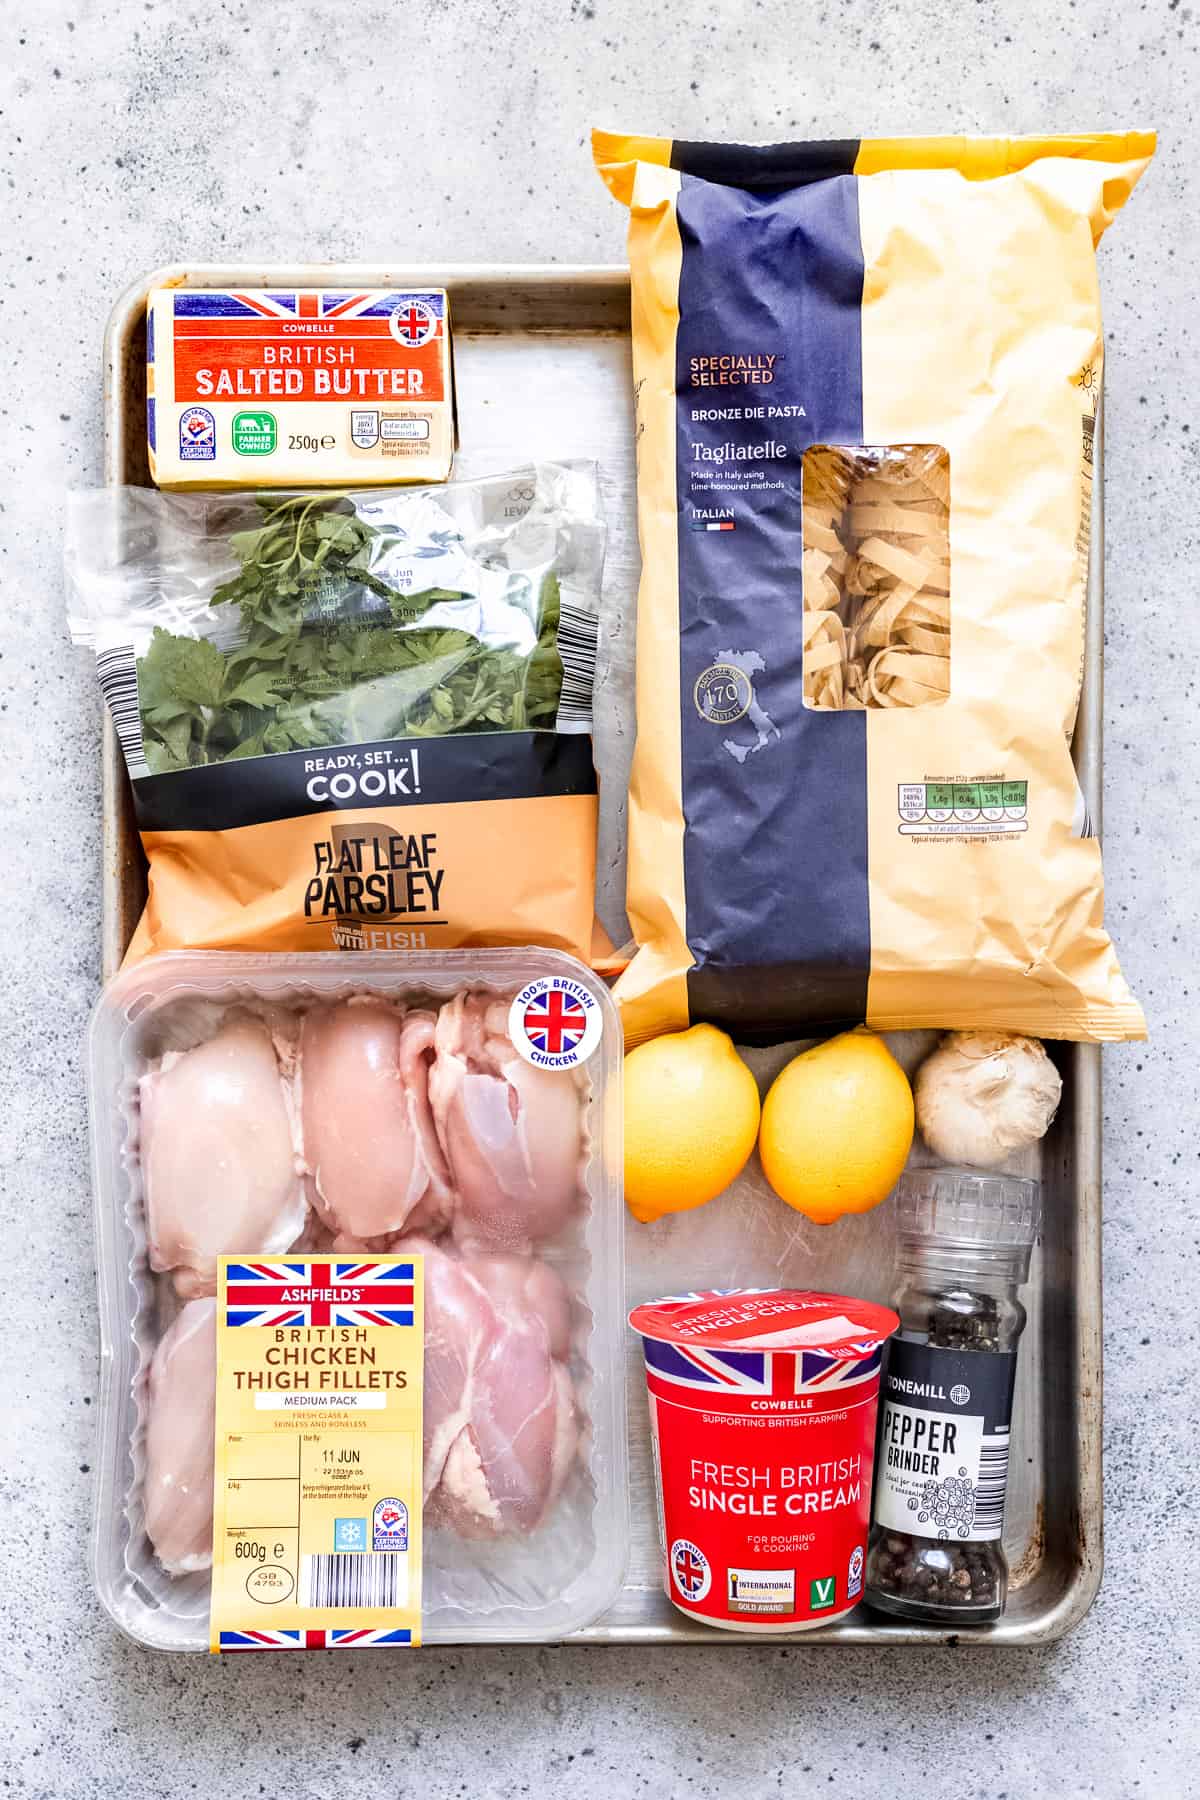 Aldi ingredients for making lemon cream sauce with chicken and pasta.